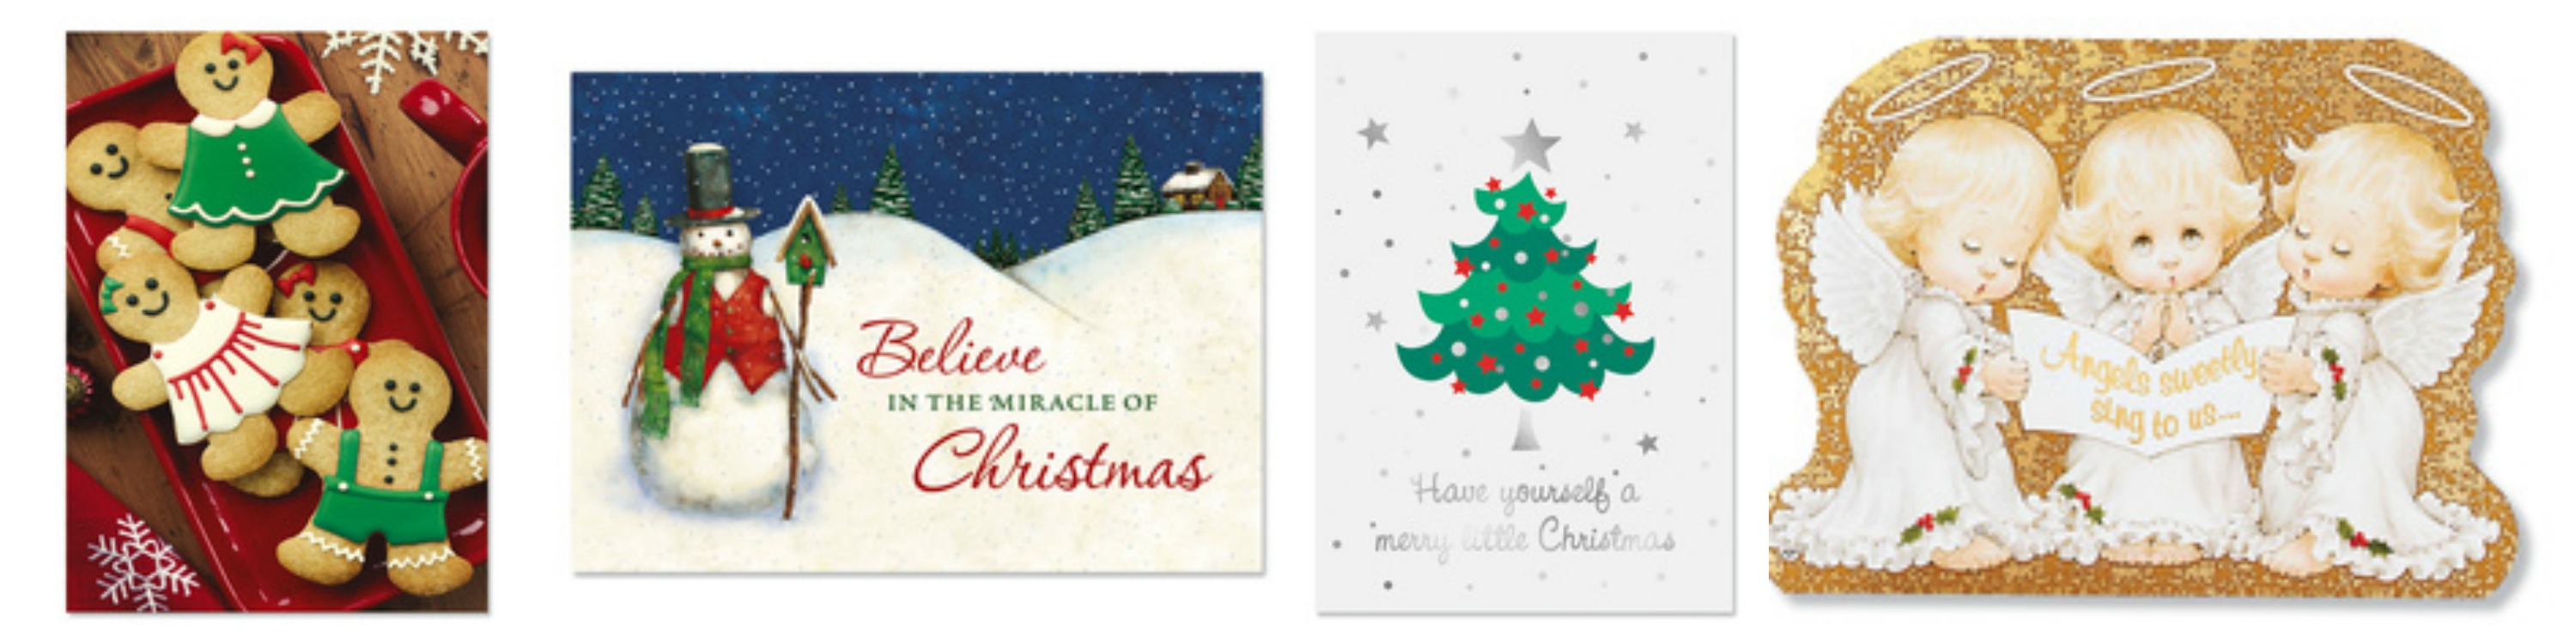 ... Christmas card etiquette to keep in mind while preparing this year’s